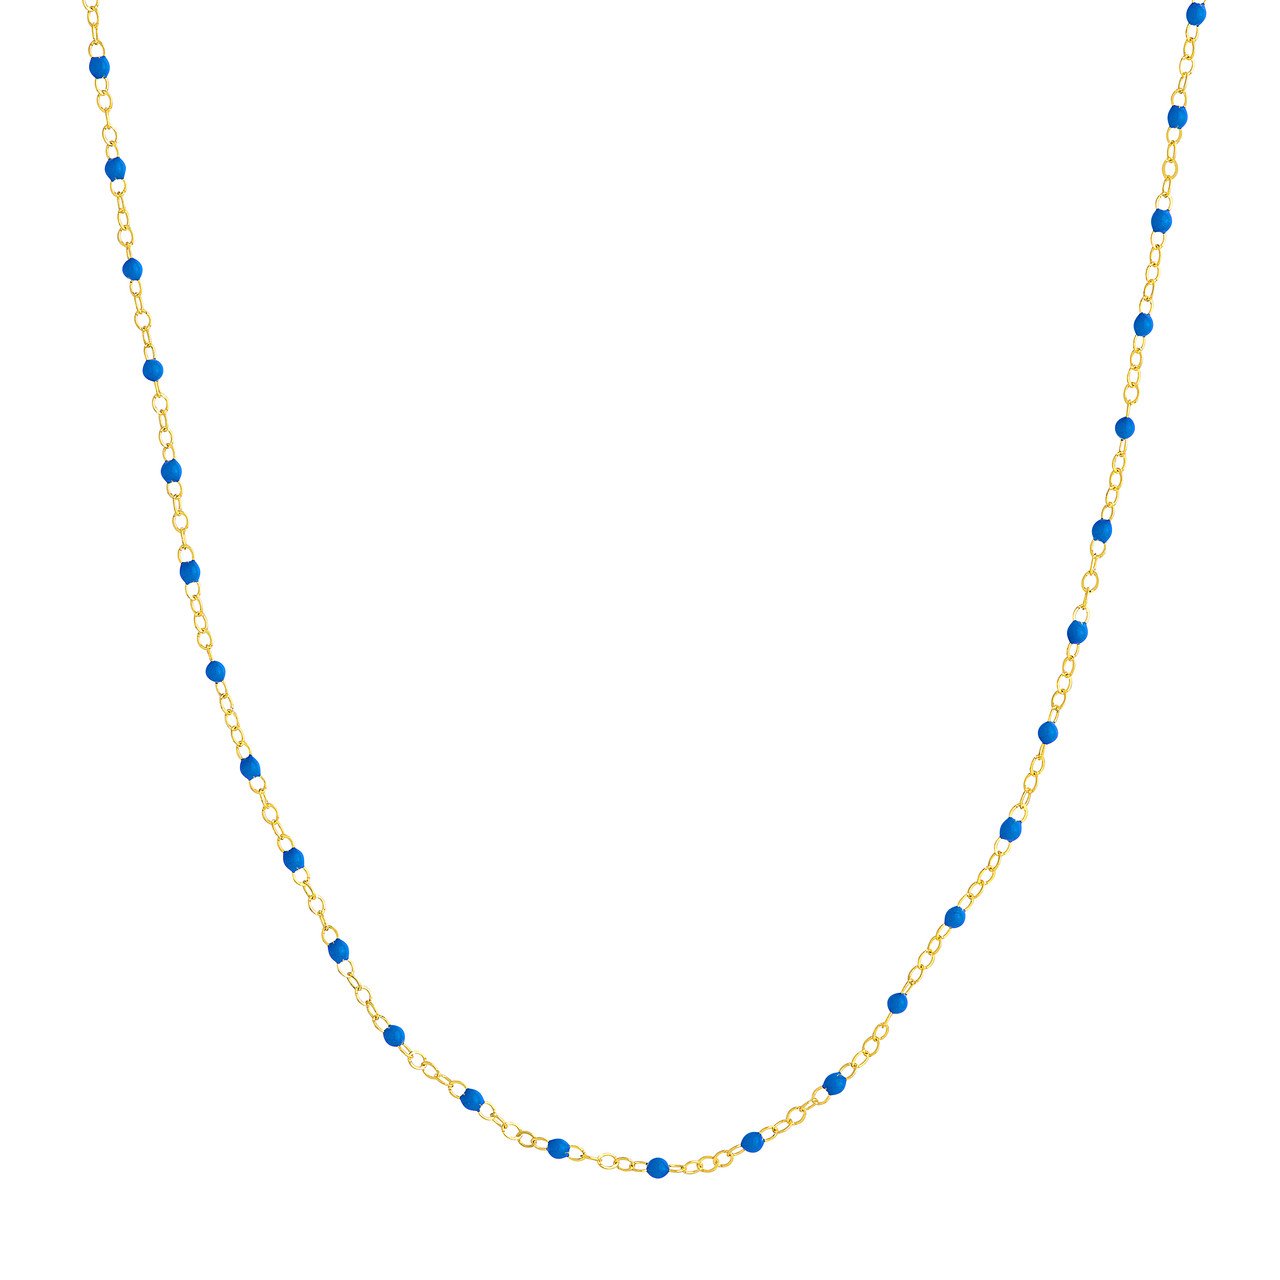 14K Yellow Gold and Cobalt Enamel Bead Station Necklace